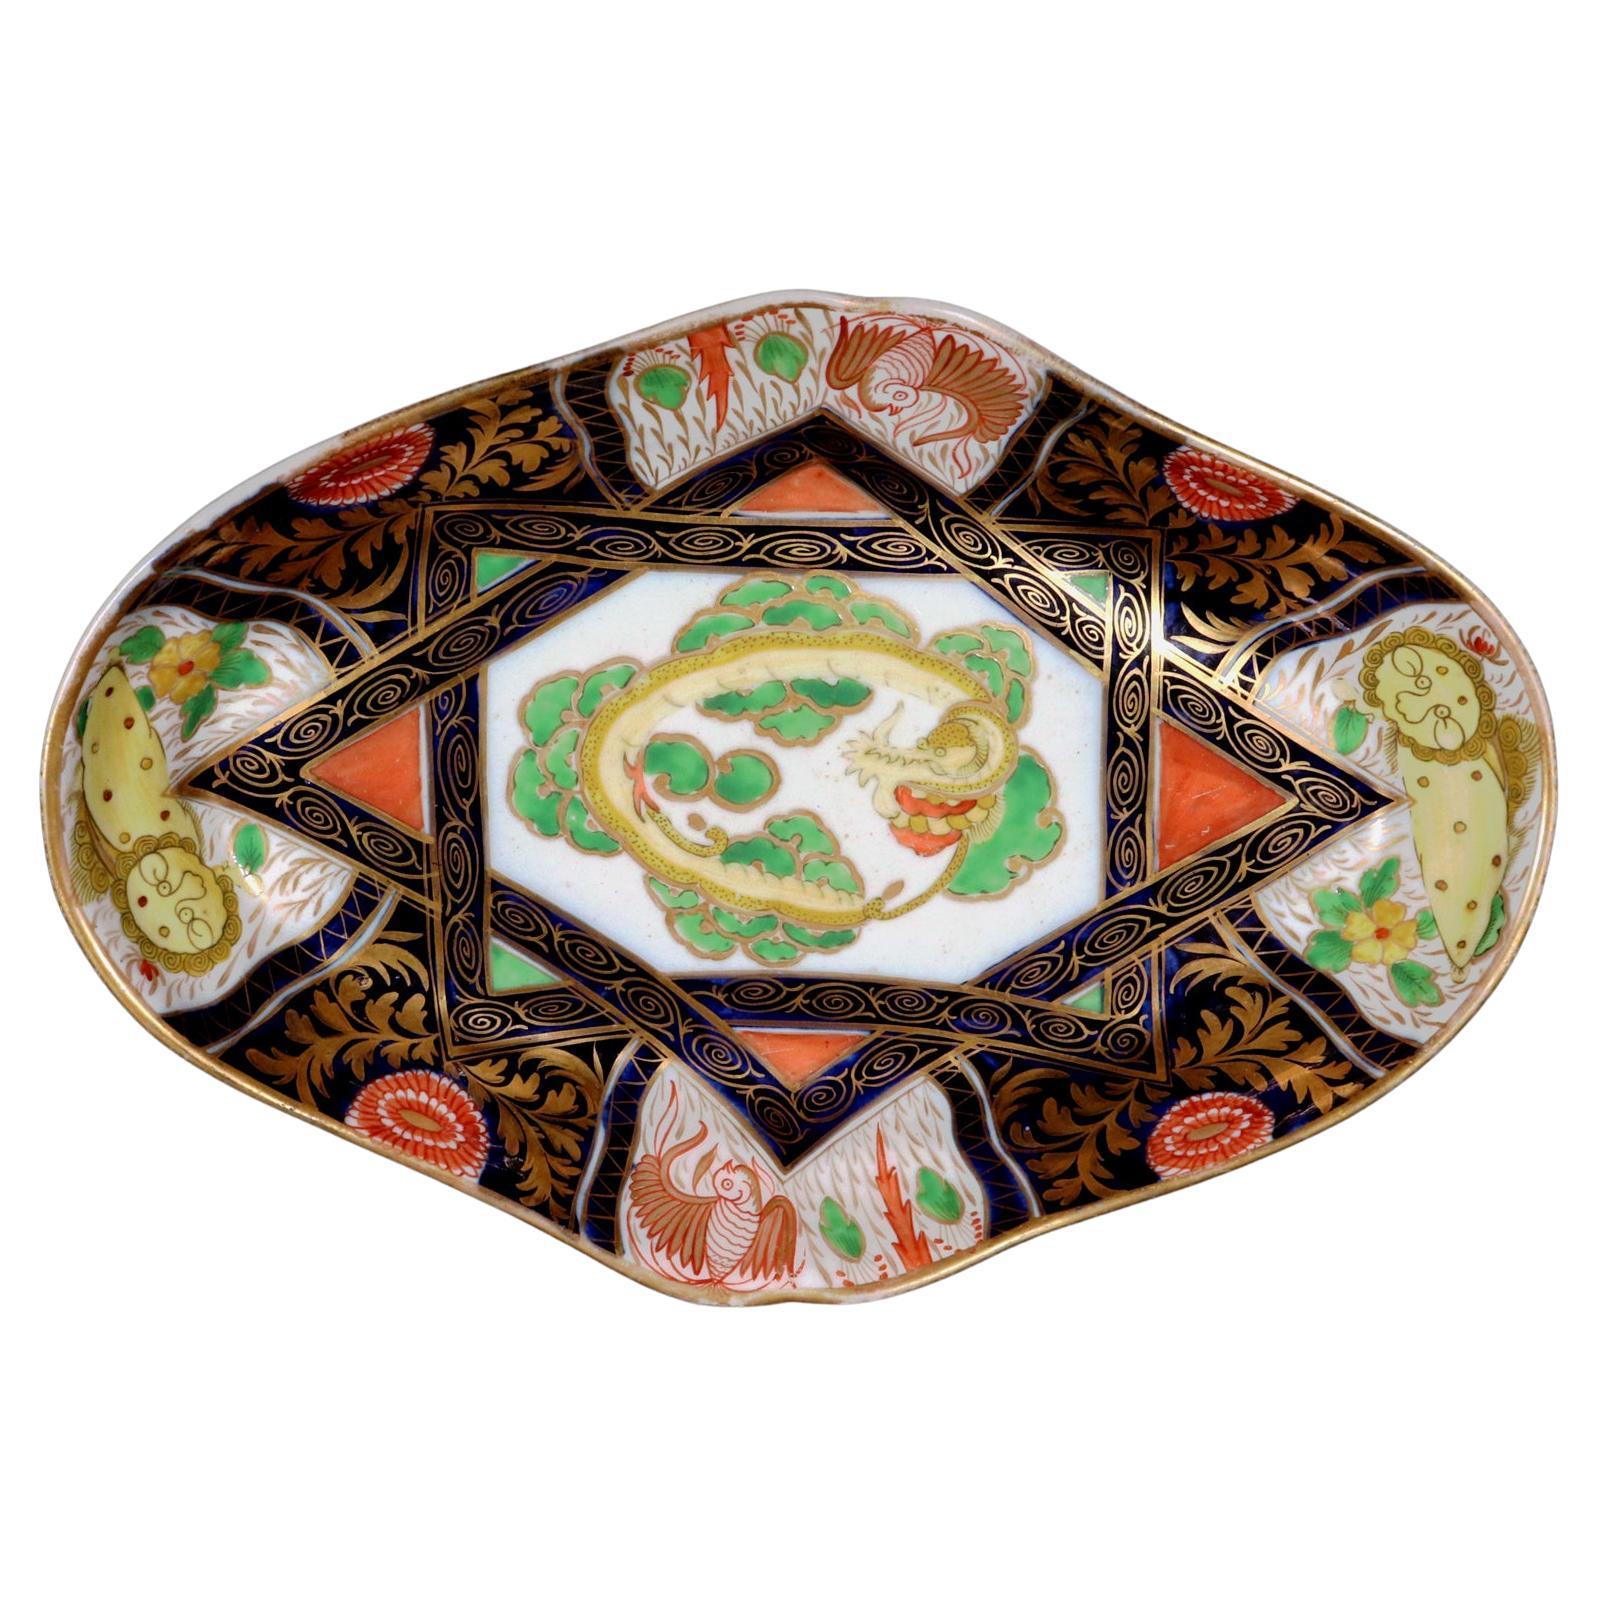 Regency Period Coalport Porcelain Chinoiserie Dish with Yellow Dragon & Lions For Sale